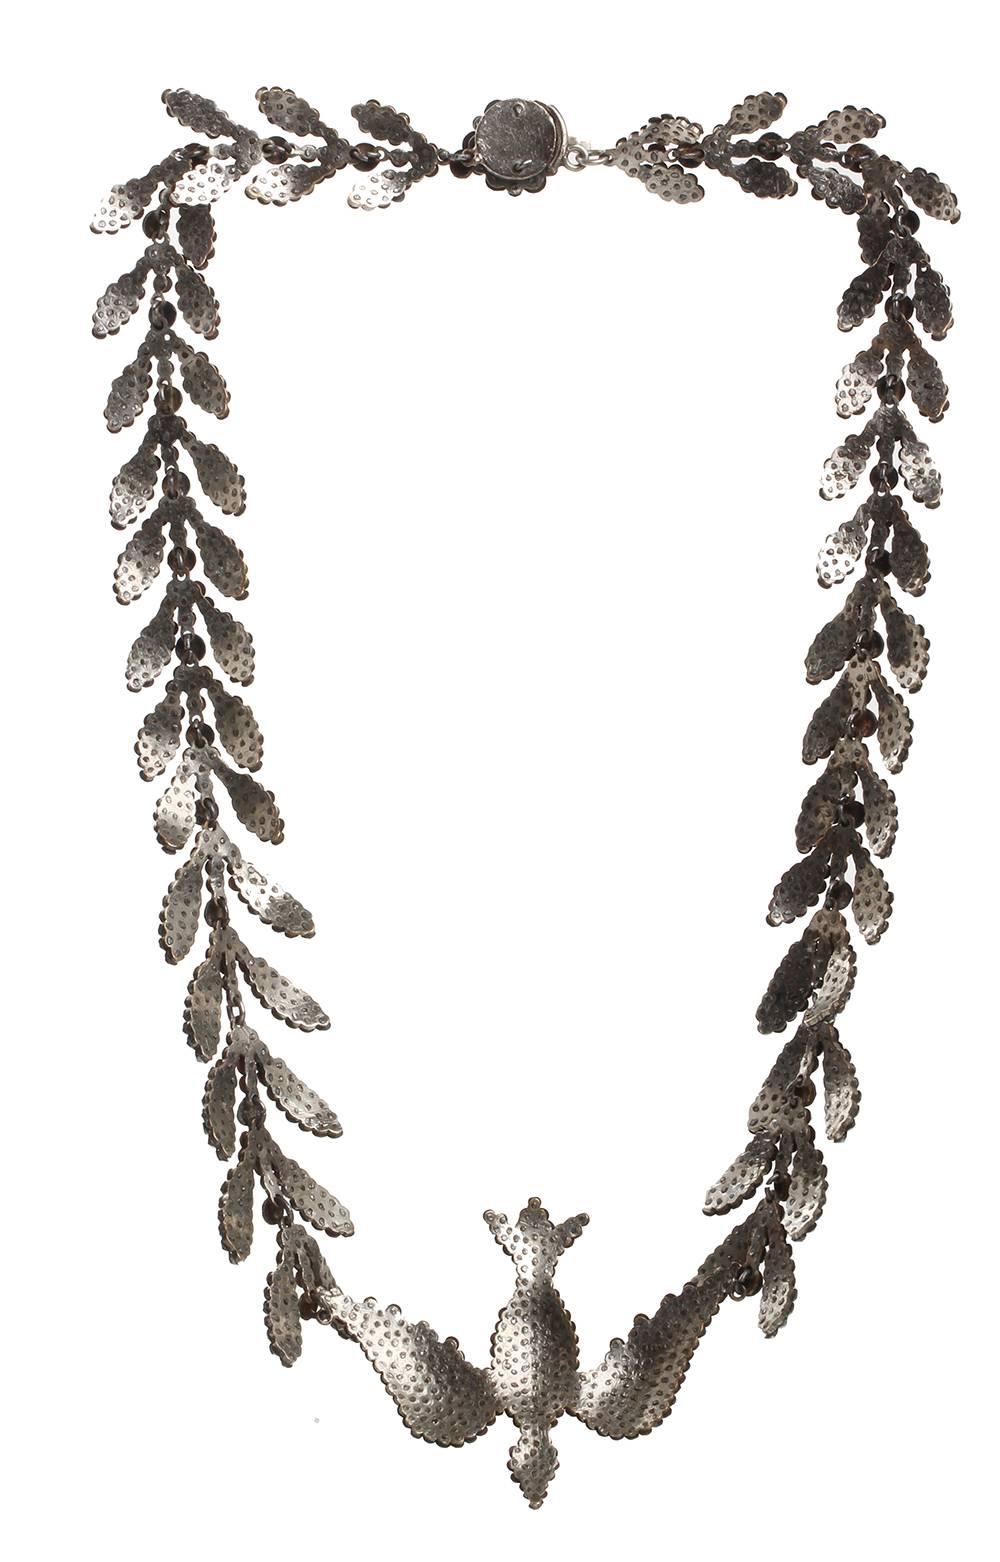 Early 19th century cut steel necklace. Dove and olive branch motif. Cut steel push clasp. Measuring a generous 16.5